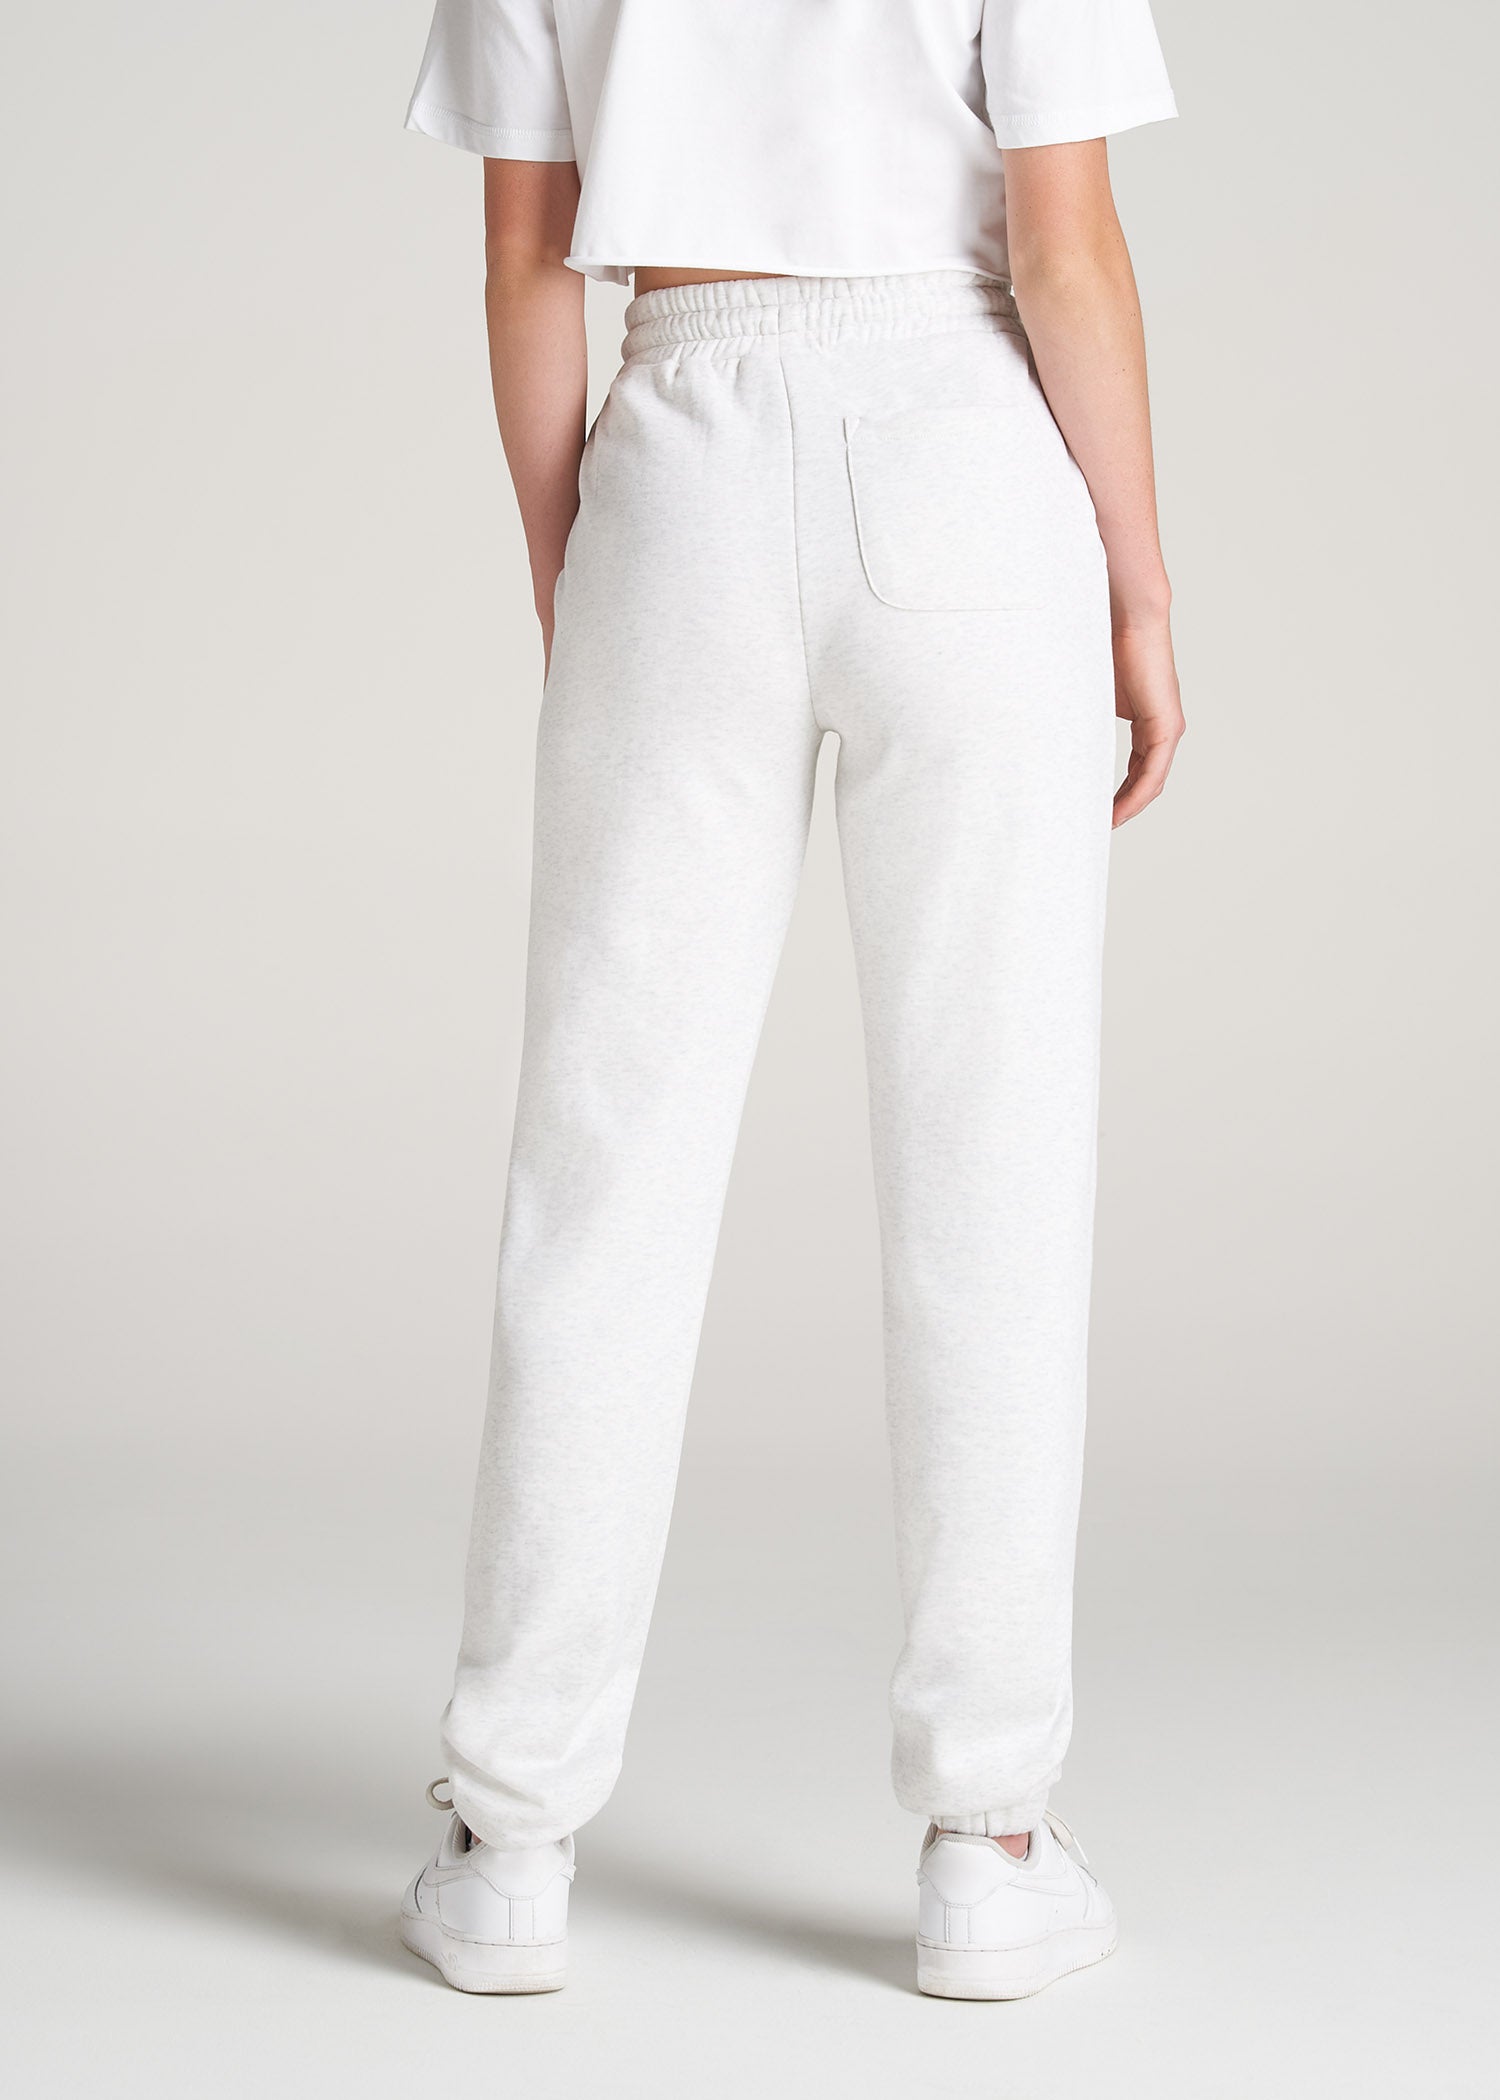 Tall Women's Fitted Sweatpants: High-Waisted White Sweatpants